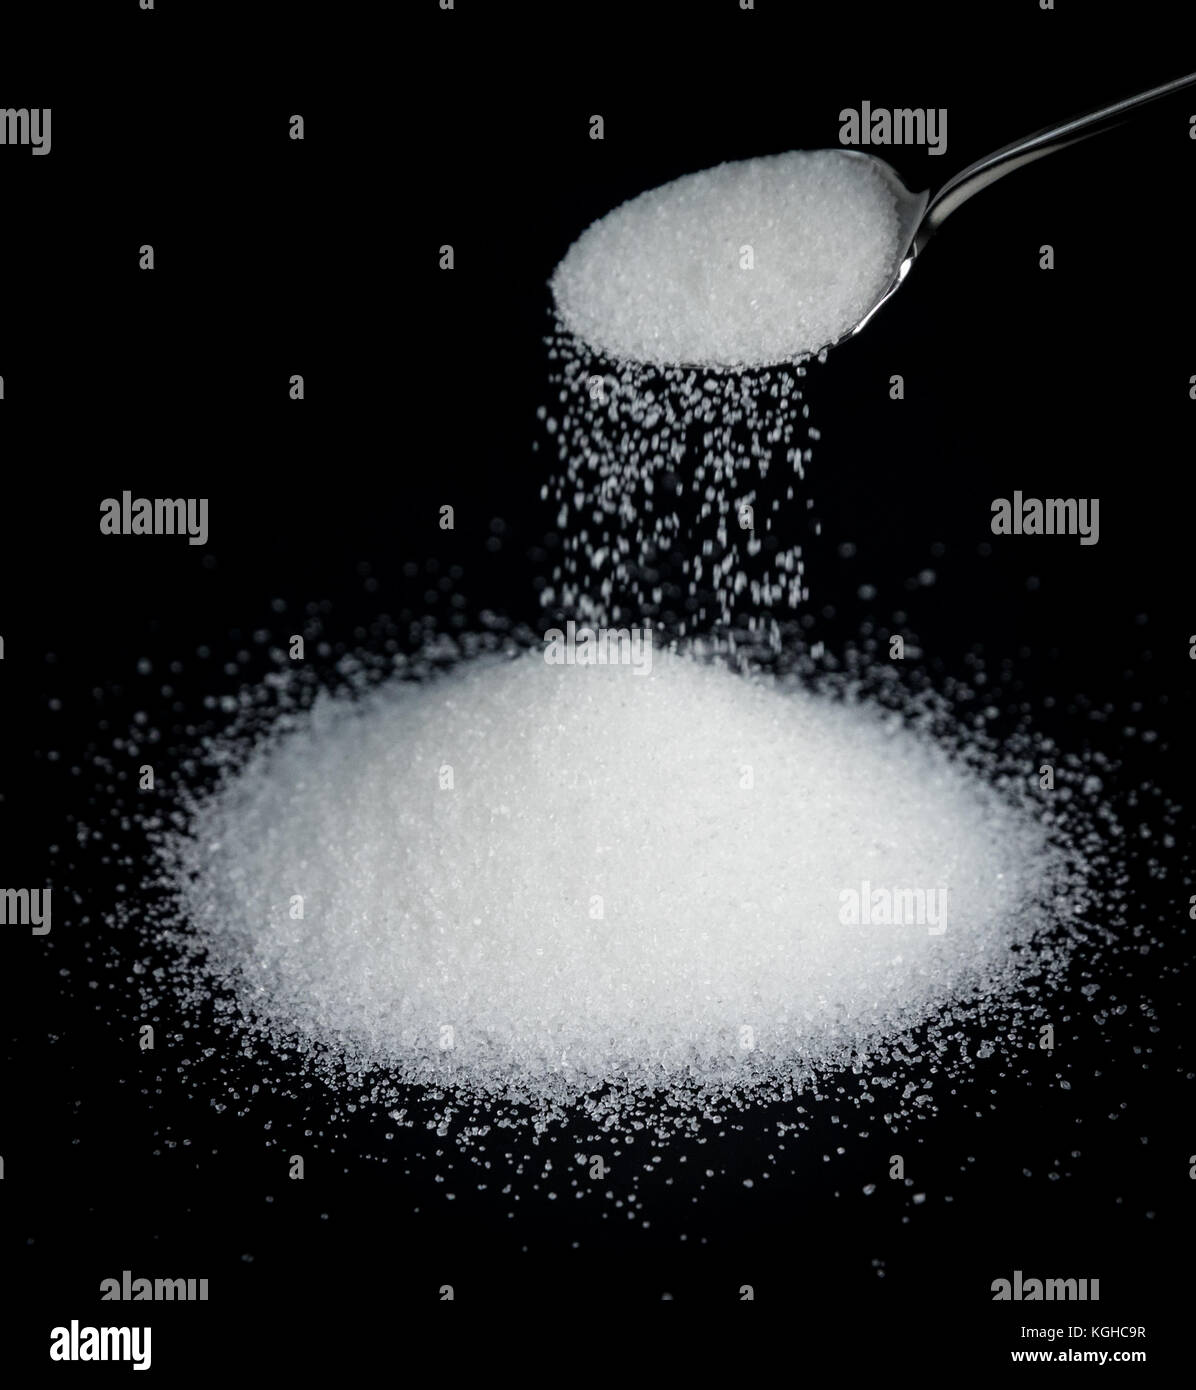 A spoonful of sugar on a black background Stock Photo